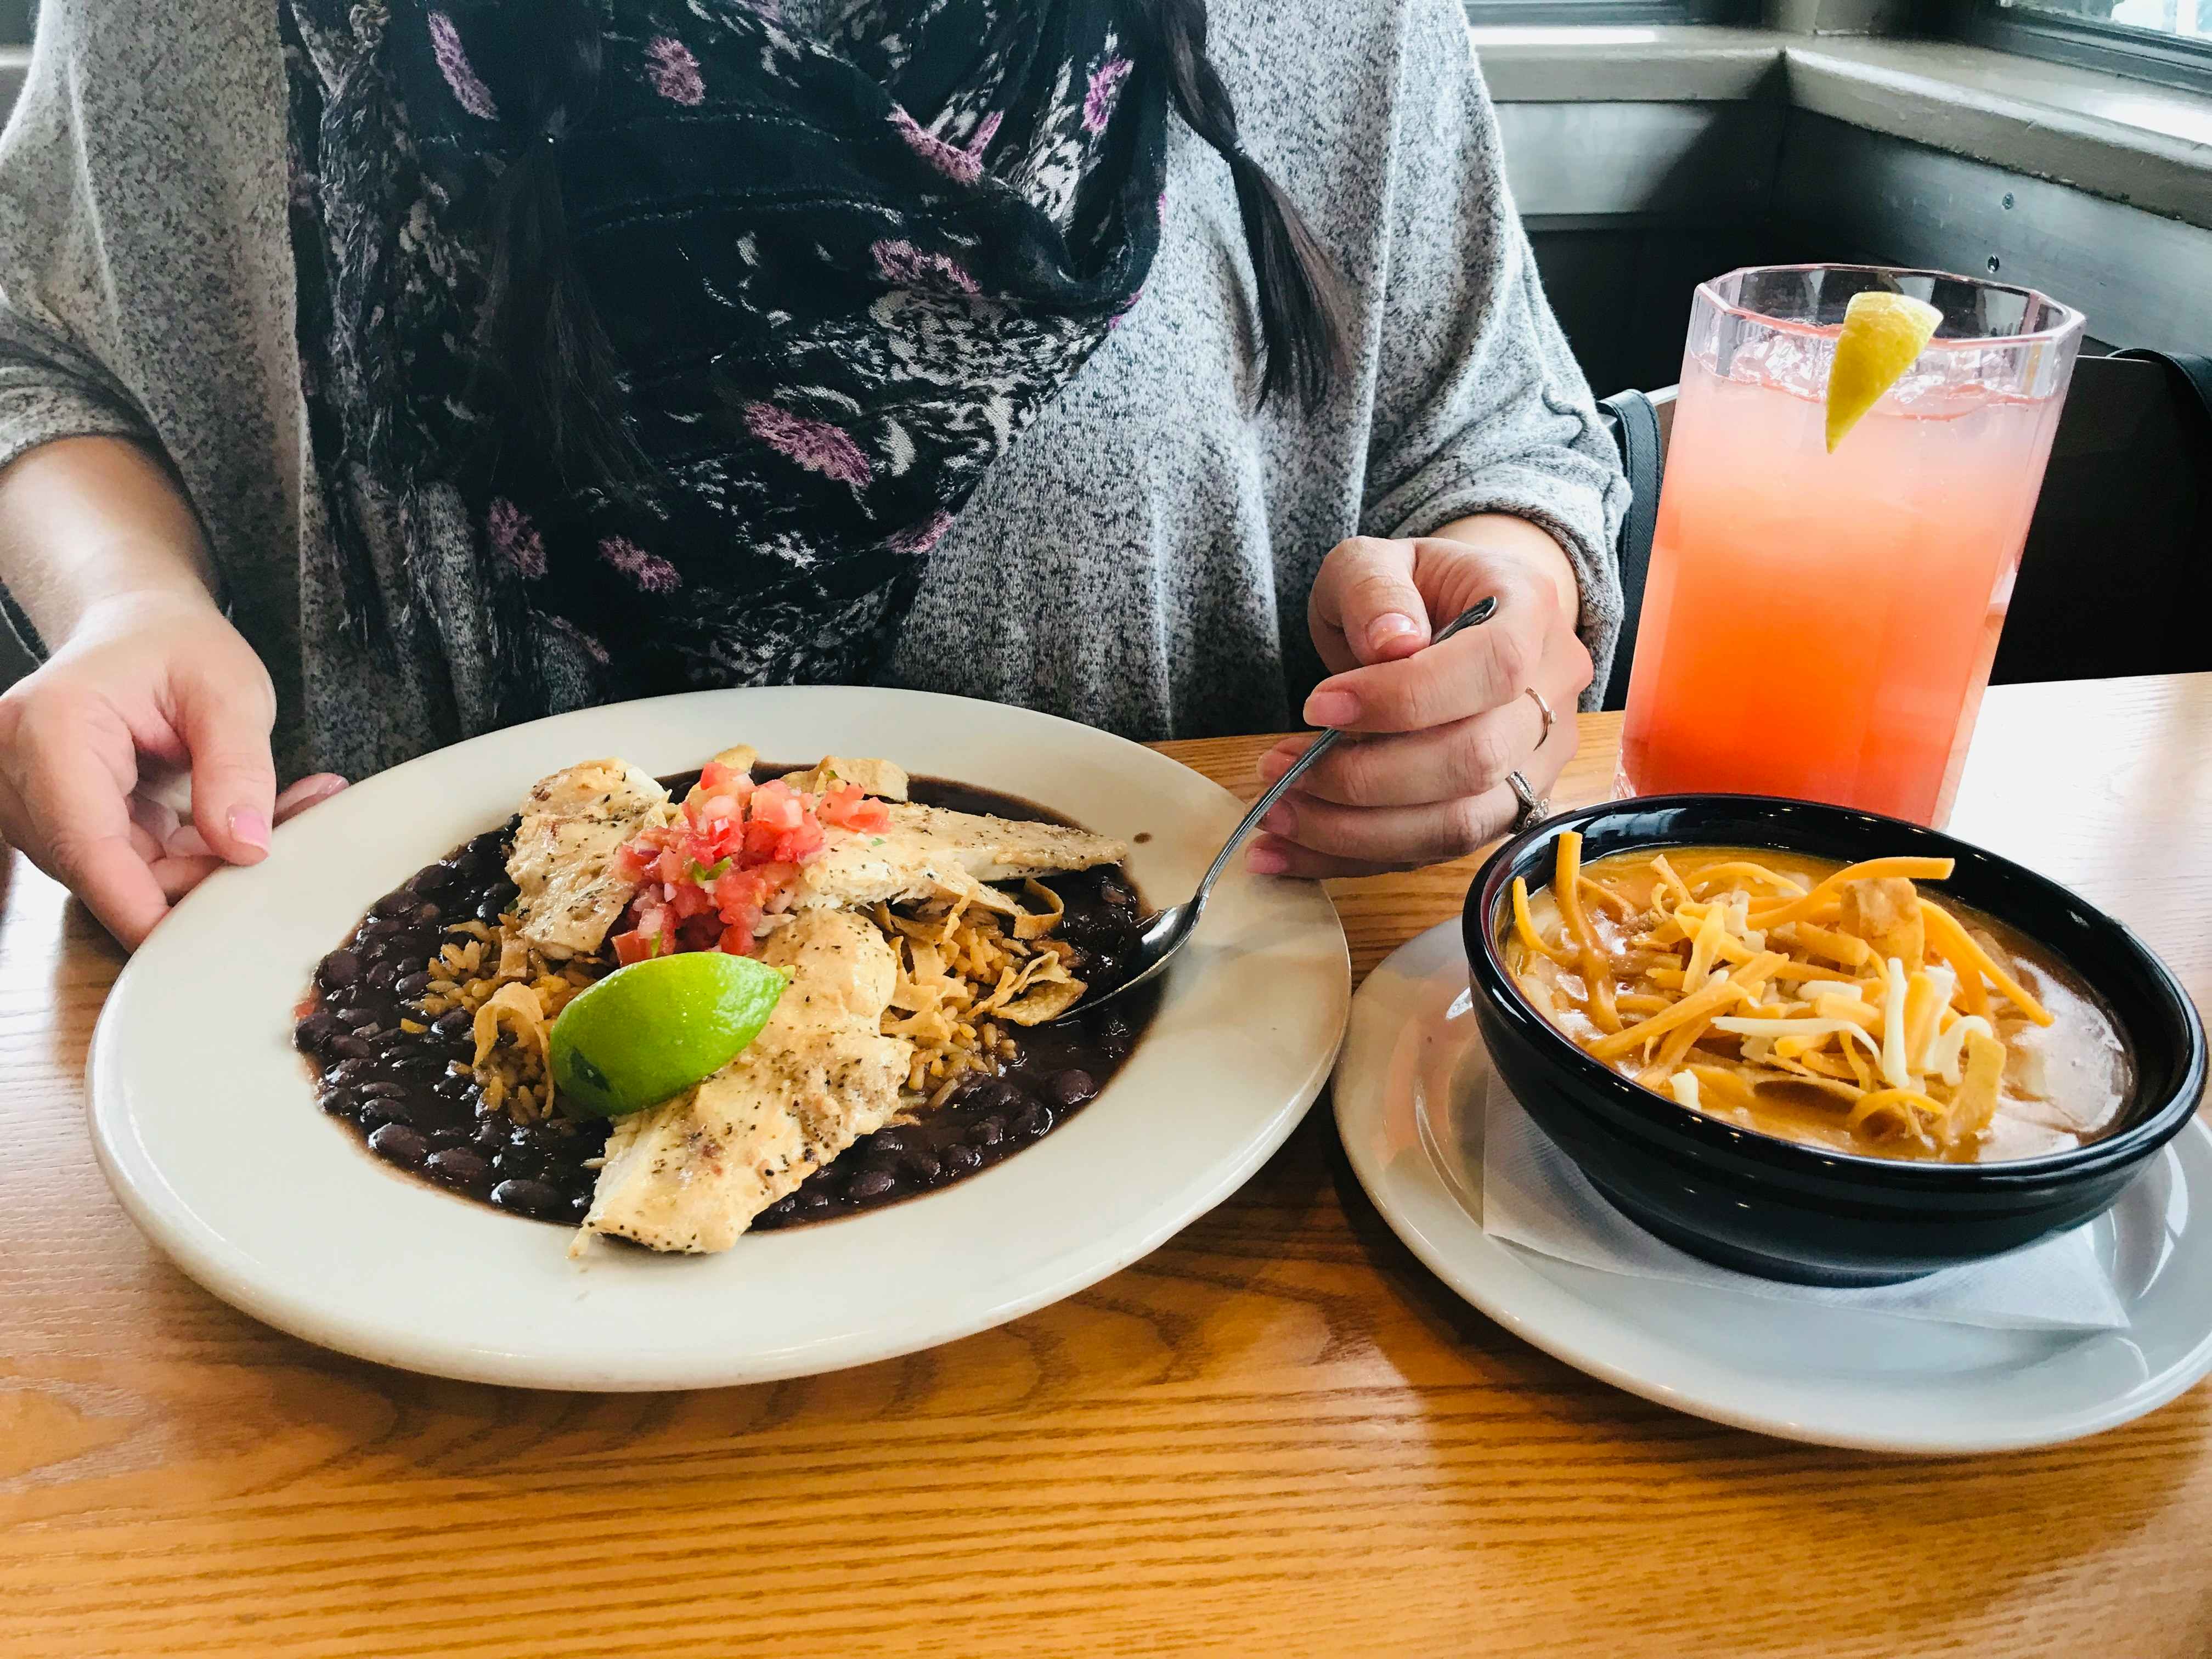 A person sitting in a Chili's booth with a meal and lemonade on the table in front of her.